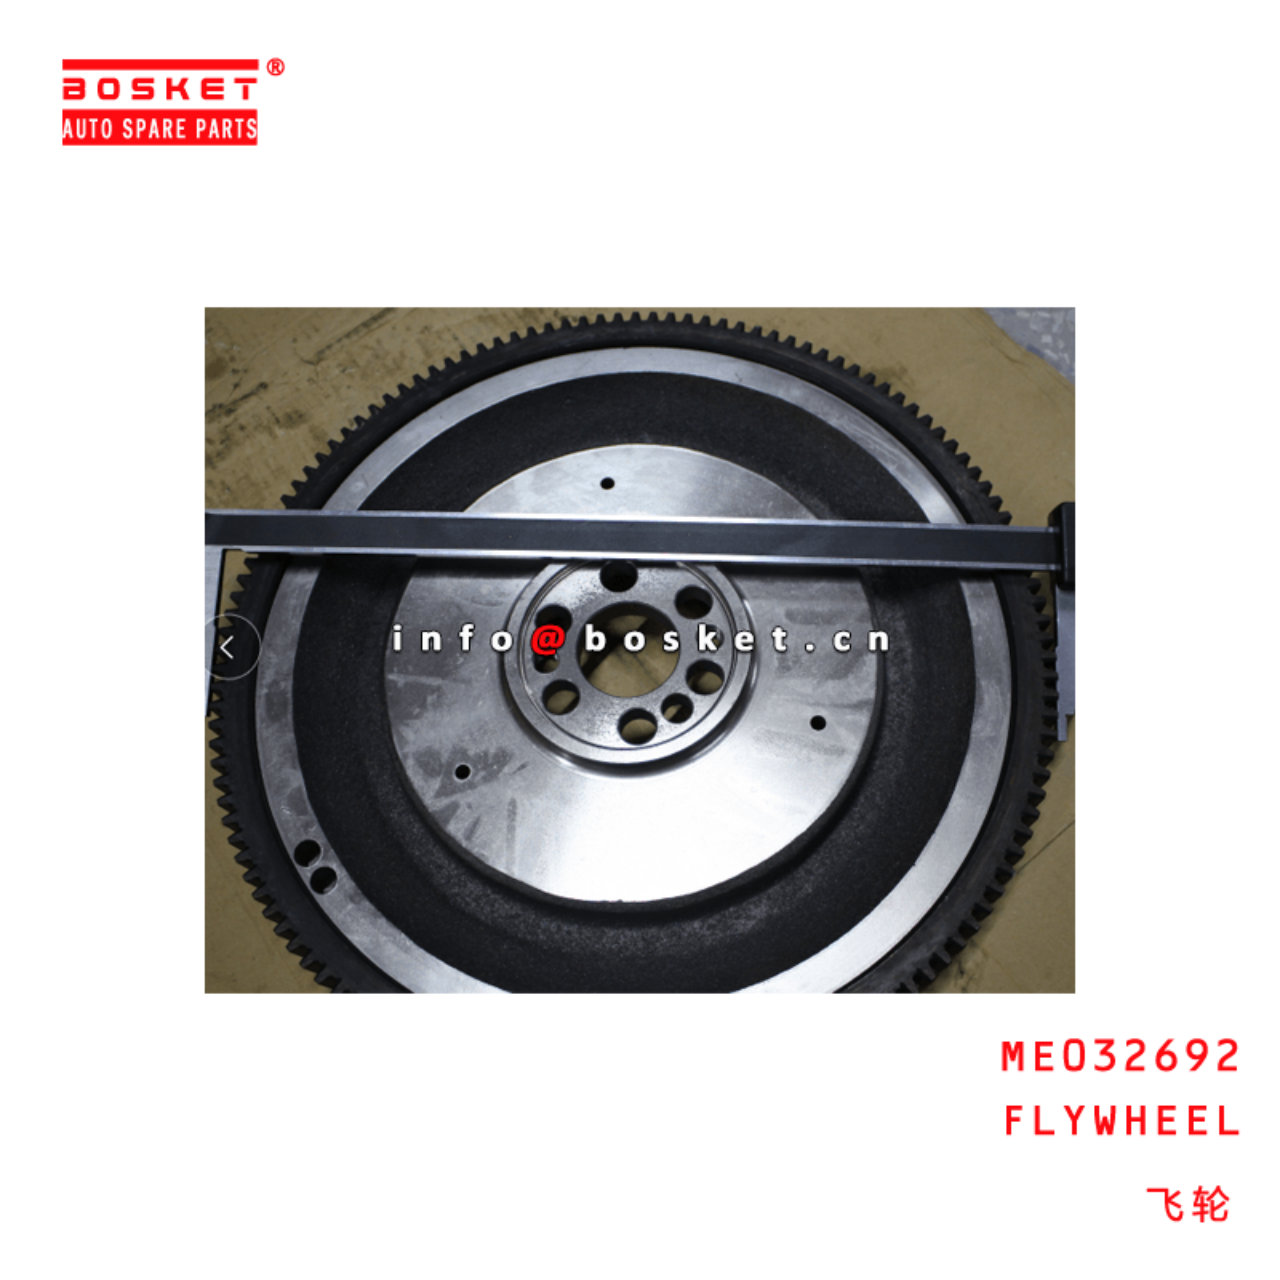 ME032692 Flywheel Suitable For MITSUBISHI FUSO 6D14